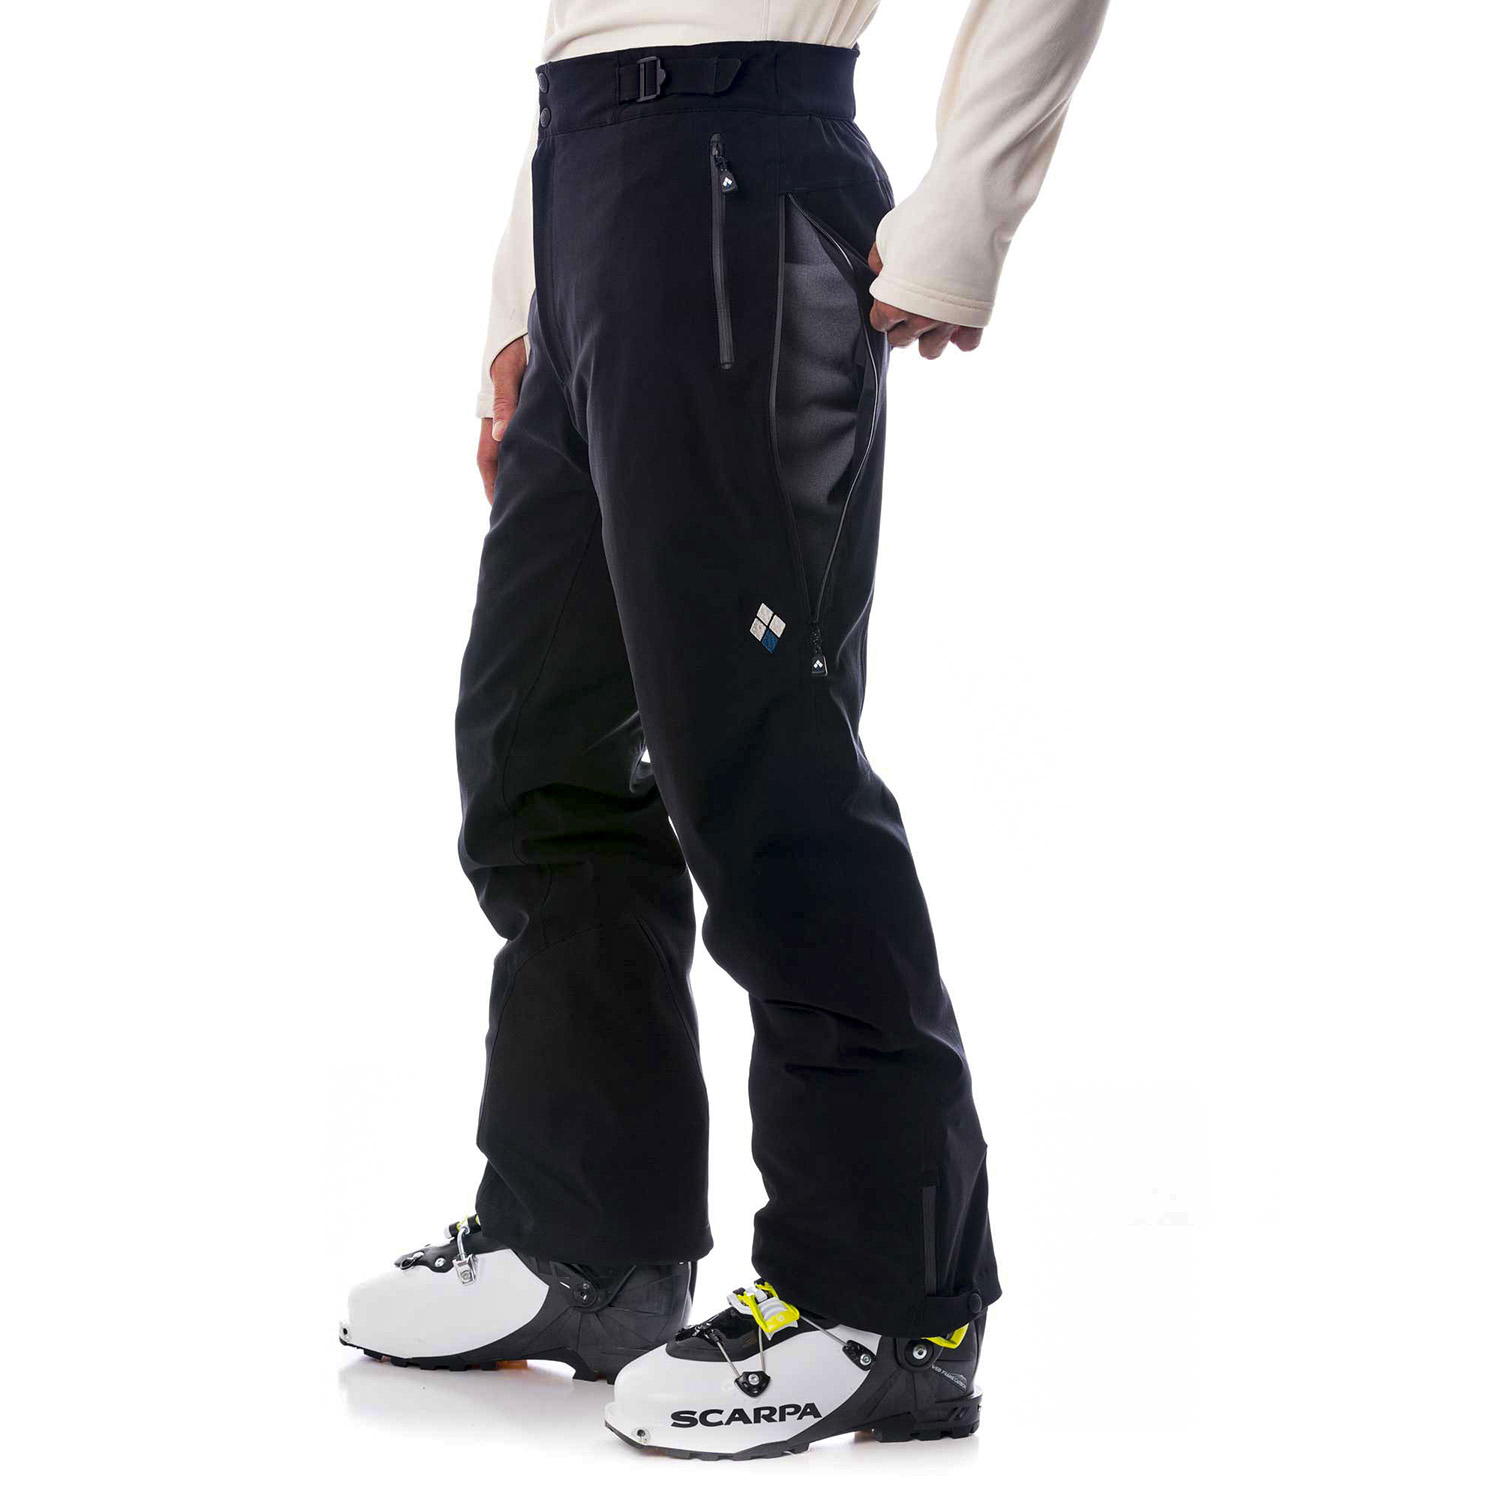 DRY-TEC Insulated Pants Men's | Montbell Euro